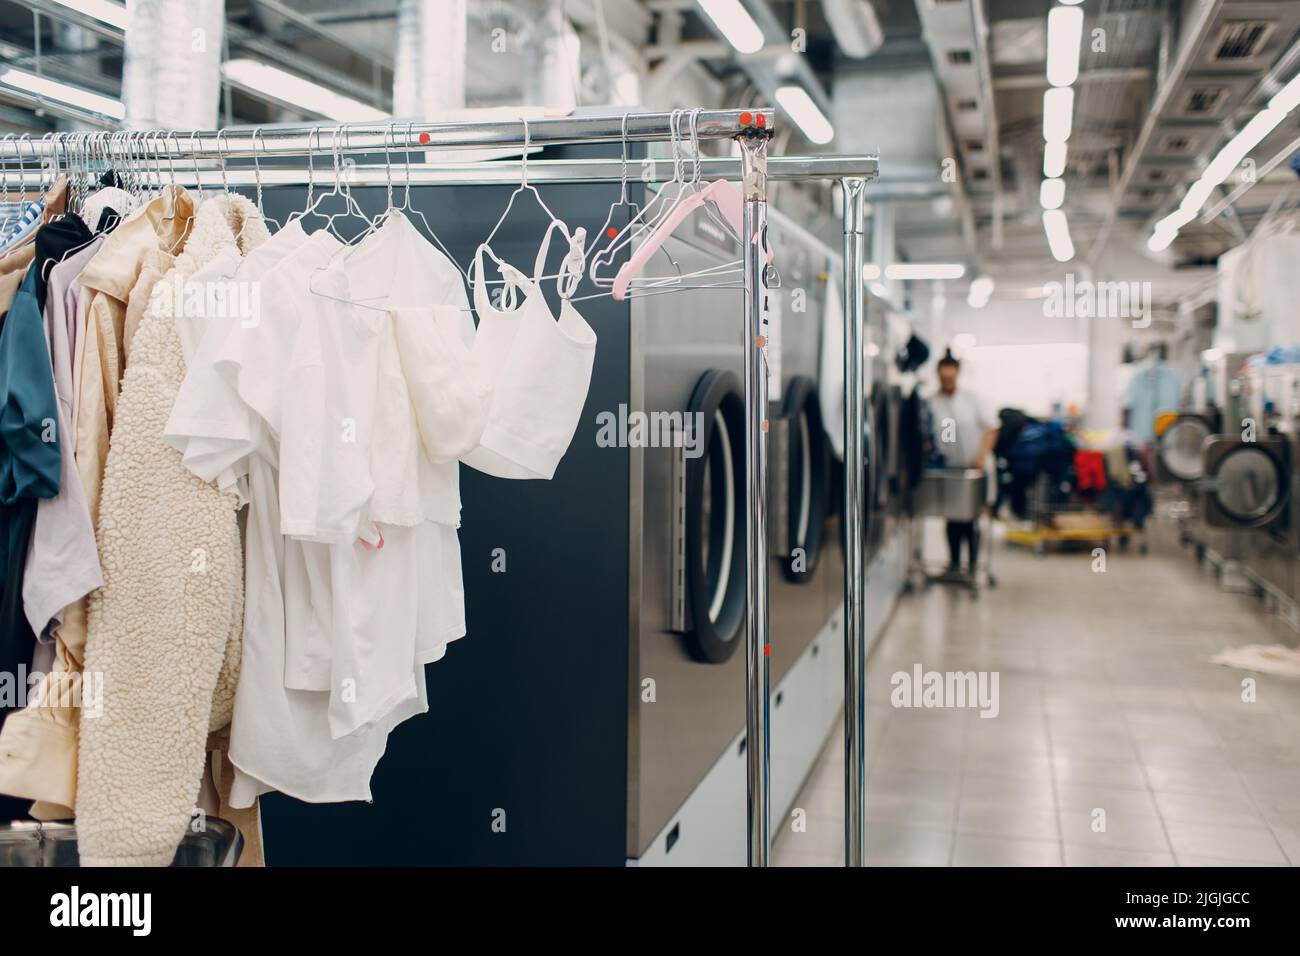 Dry cleaning clothes. Clean cloth chemical process. Laundry industrial dry-cleaning hanging clothes on rack Stock Photo